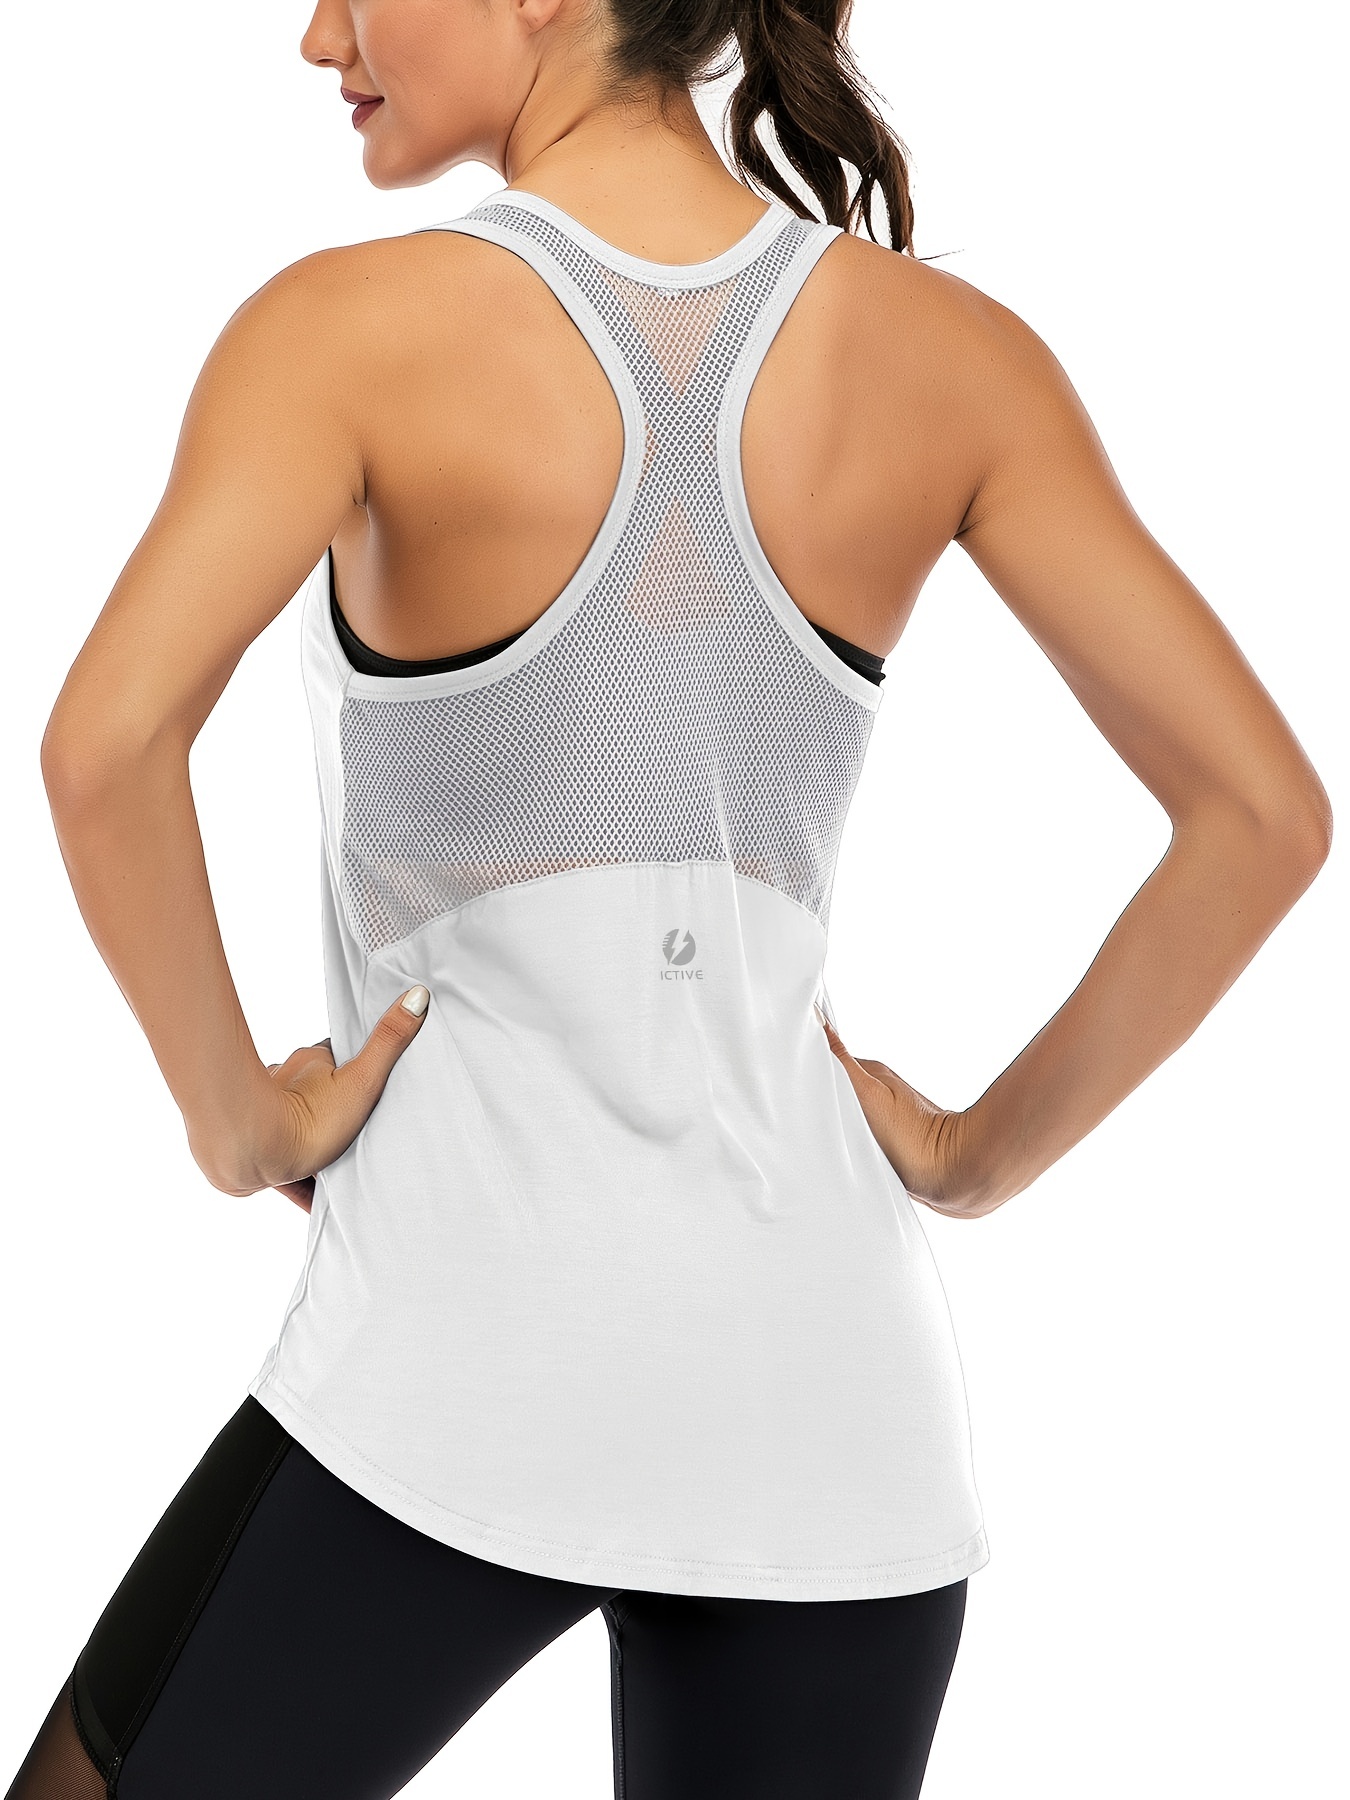 Workout Tops for Women Loose fit Racerback Tank Tops Tie Back Running Tank  Tops Mesh Backless, Black/Gray/White/ Size S-XL